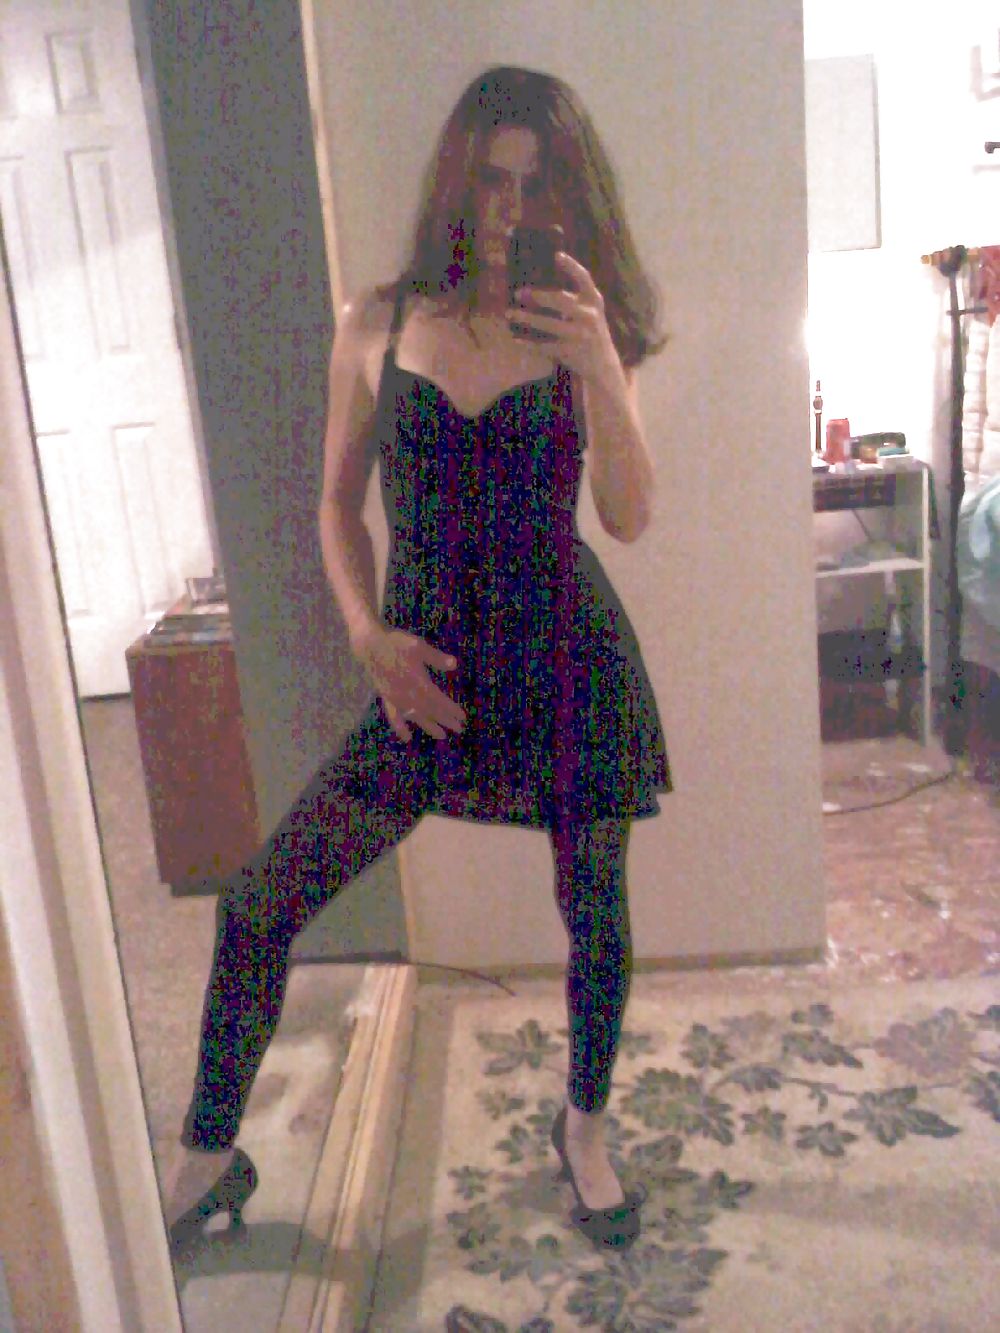 Home from porn store New vibrater and new tights! :) #12194922